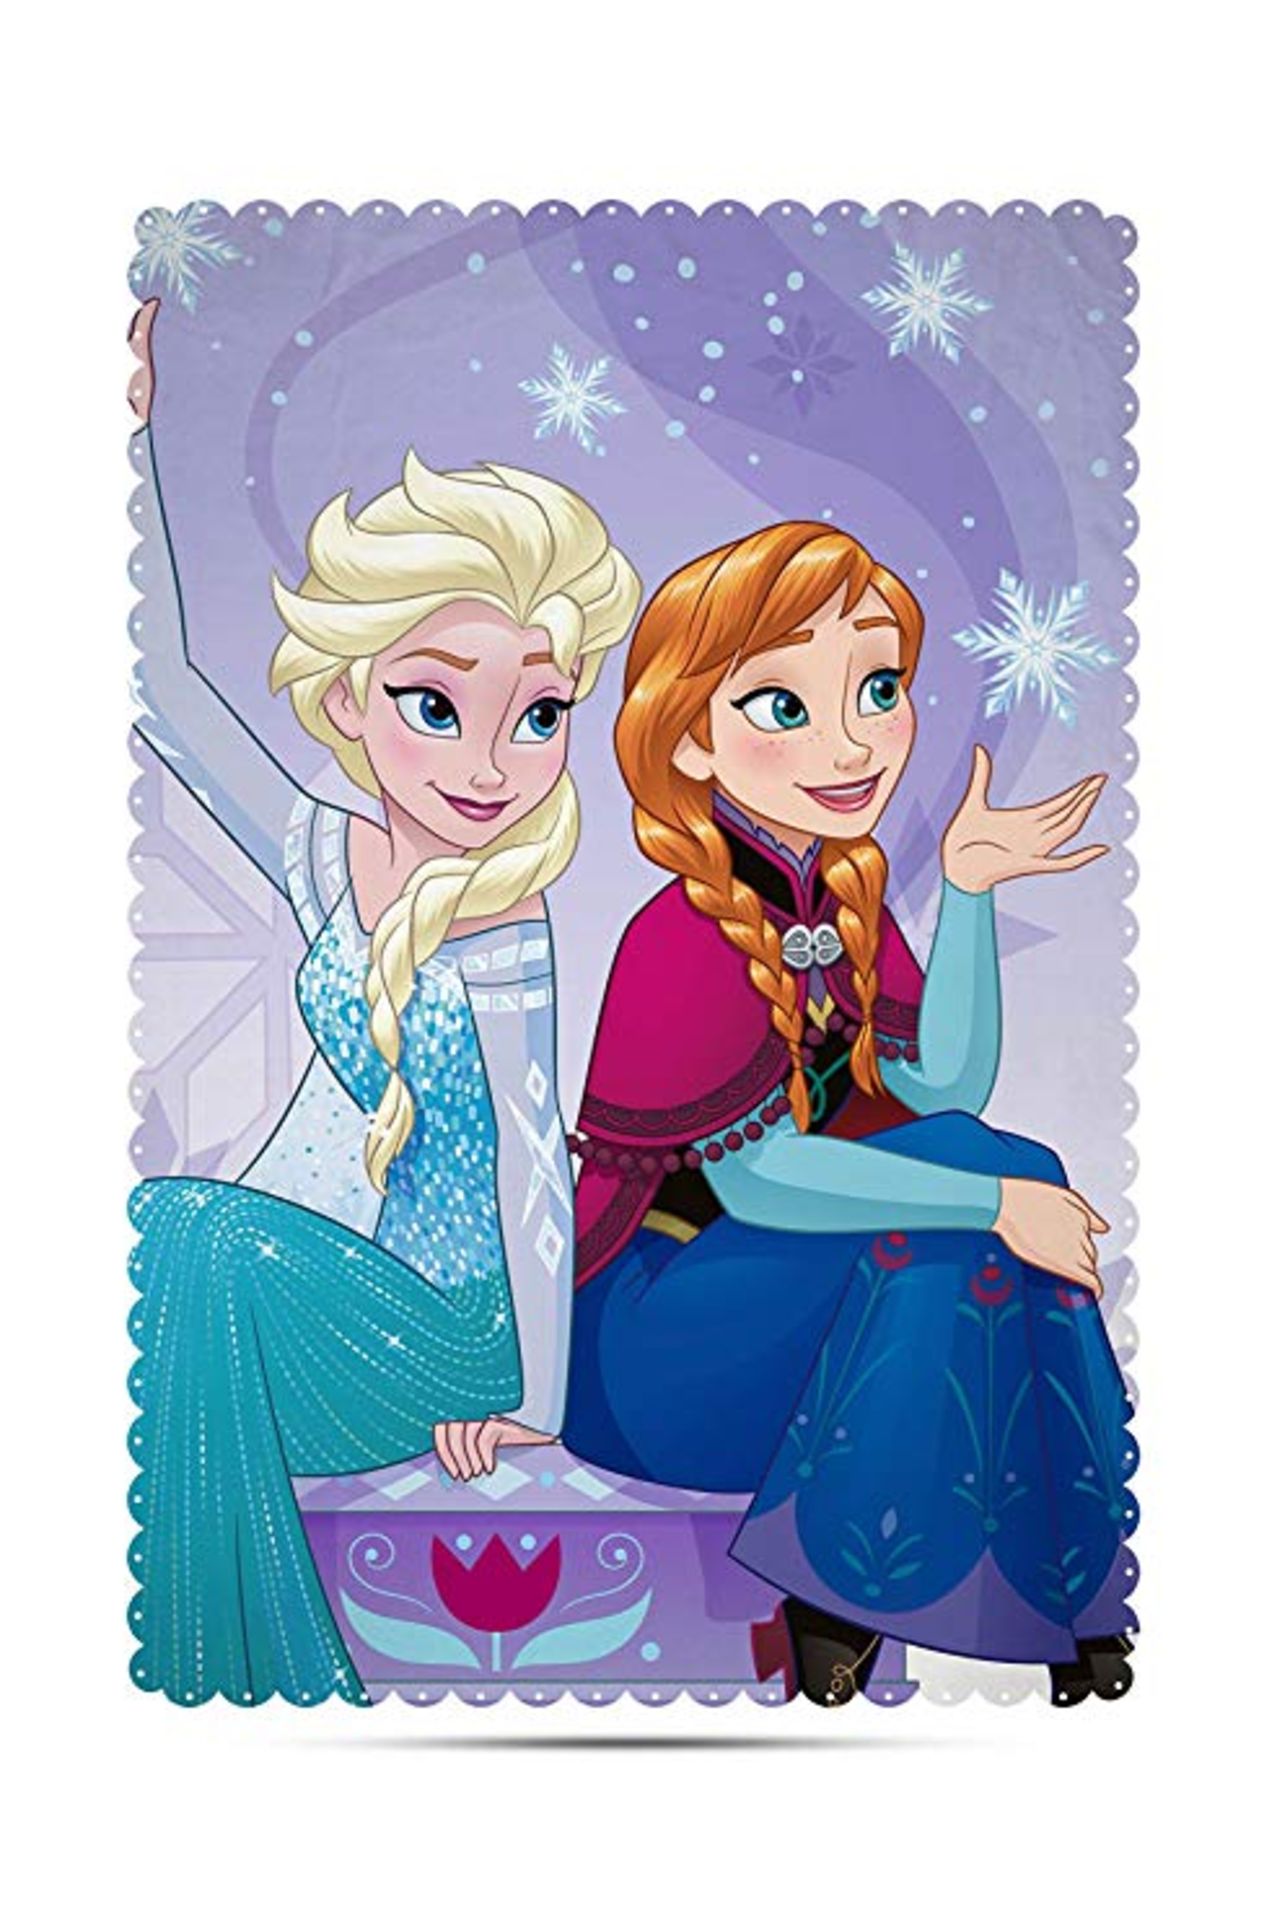 10pcs brand new assorted Frozen Fleece designs will be picked from stock at random